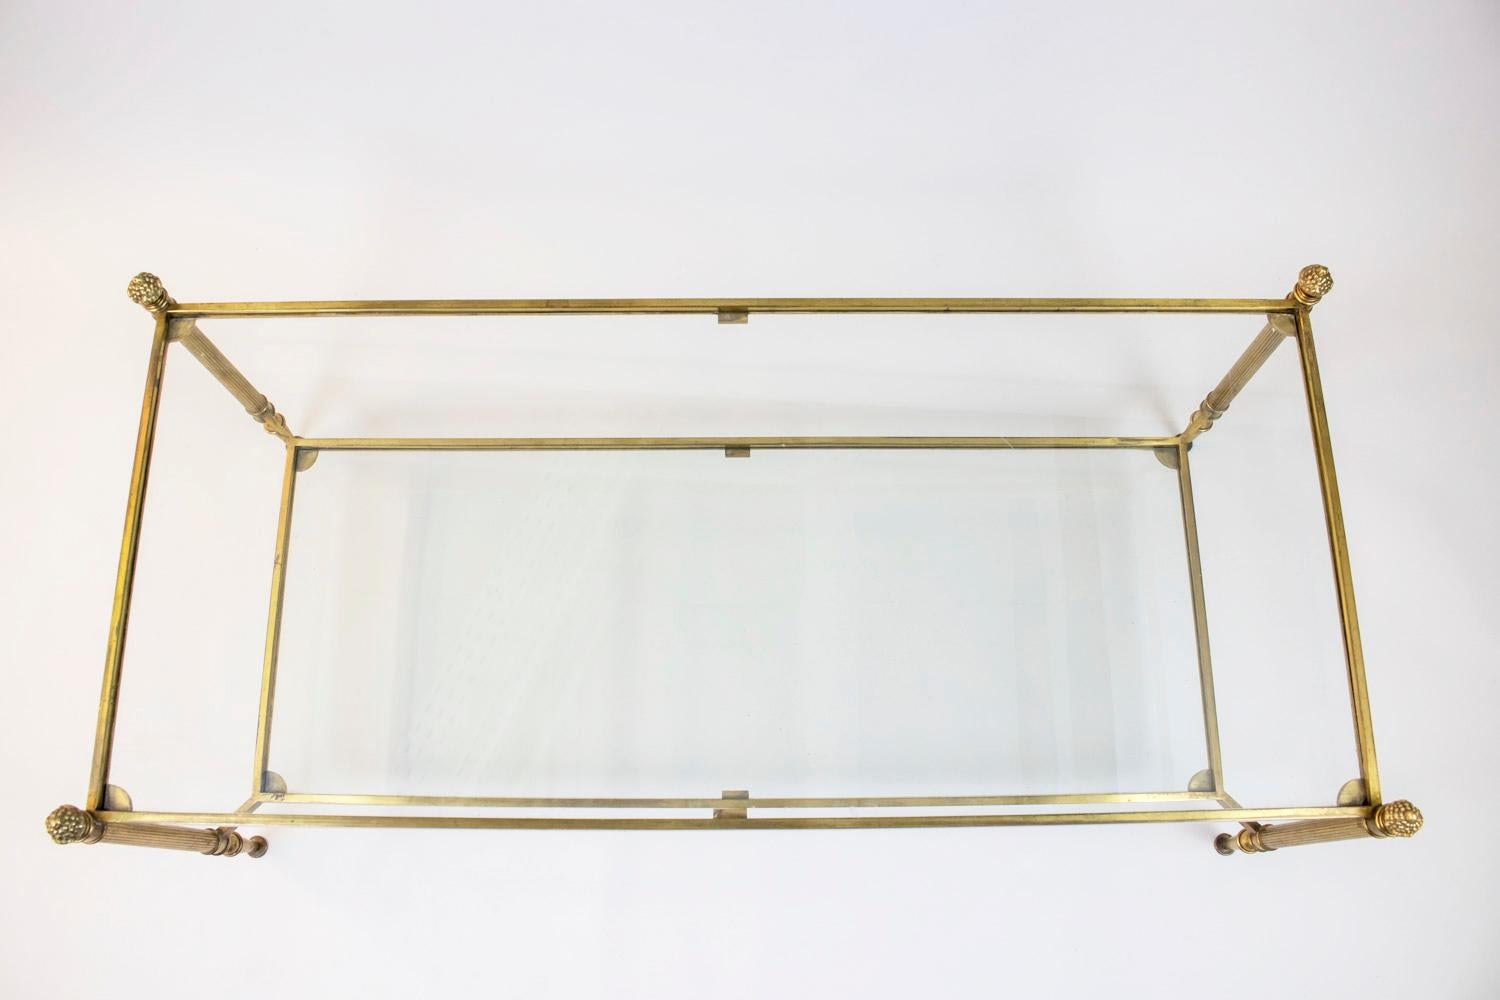 Rectangular gilt brass coffee table with standing on four tapered legs with fluted uprights topped by pinecones.
The stretcher in rectangular glass tray framed with gilt brass, such as the upper tray.
Work in the Maison Jansen style, realized in